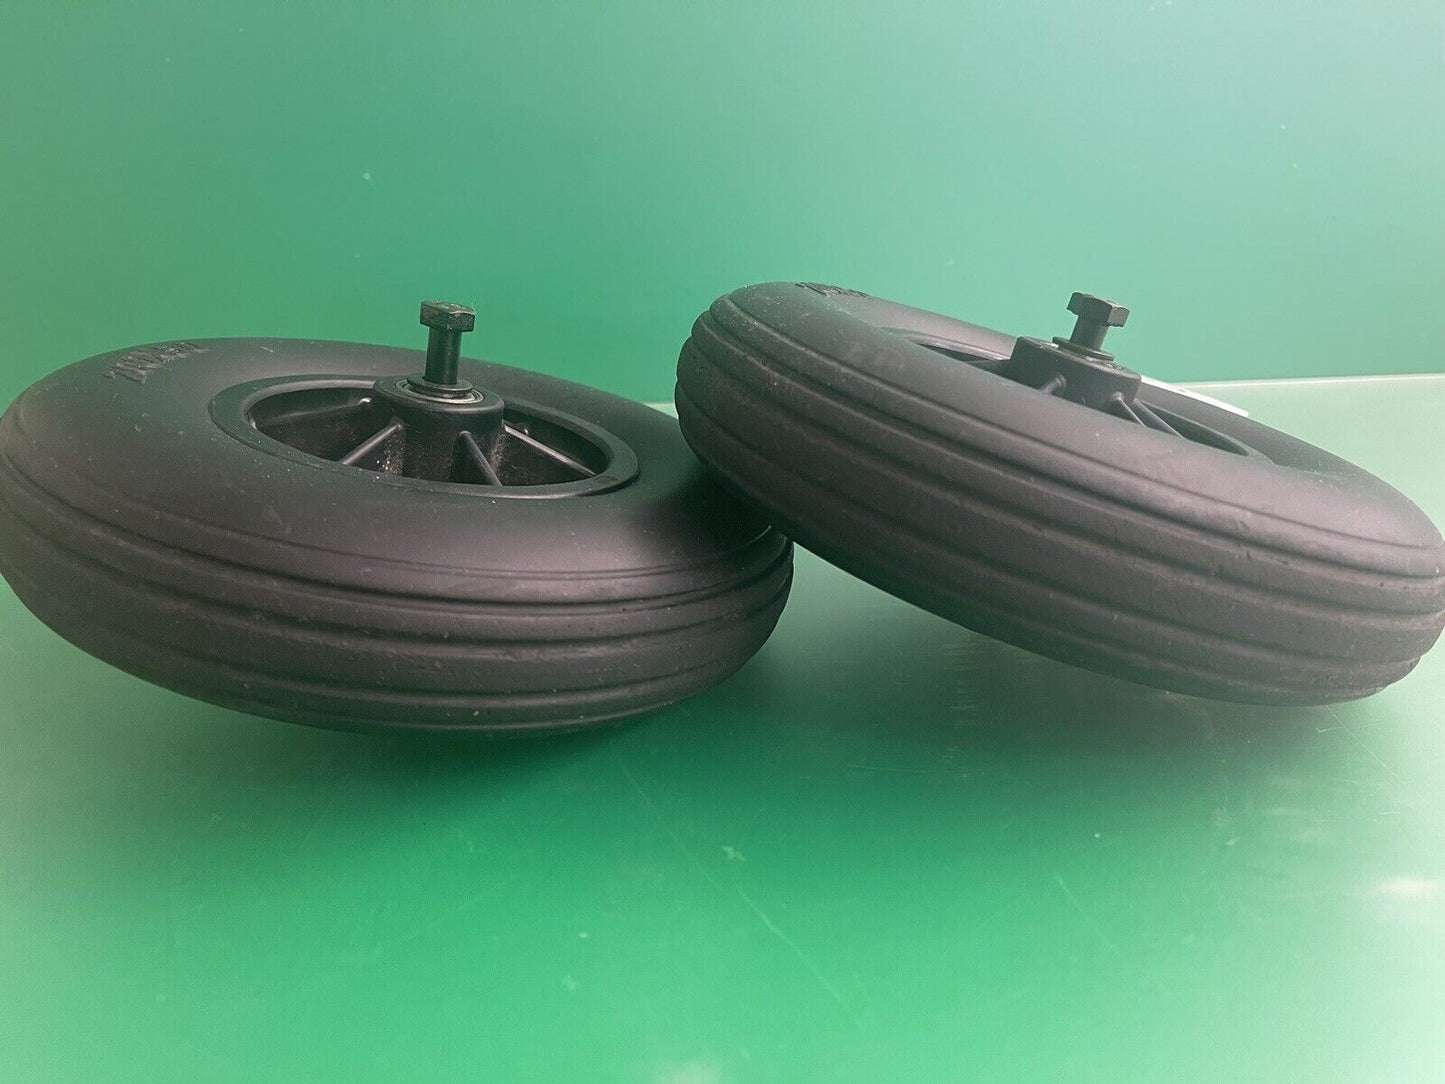 8"x2" 200x50 Set of 2 Rear Caster Wheel for the Jazzy Select HD Powerchair #i173